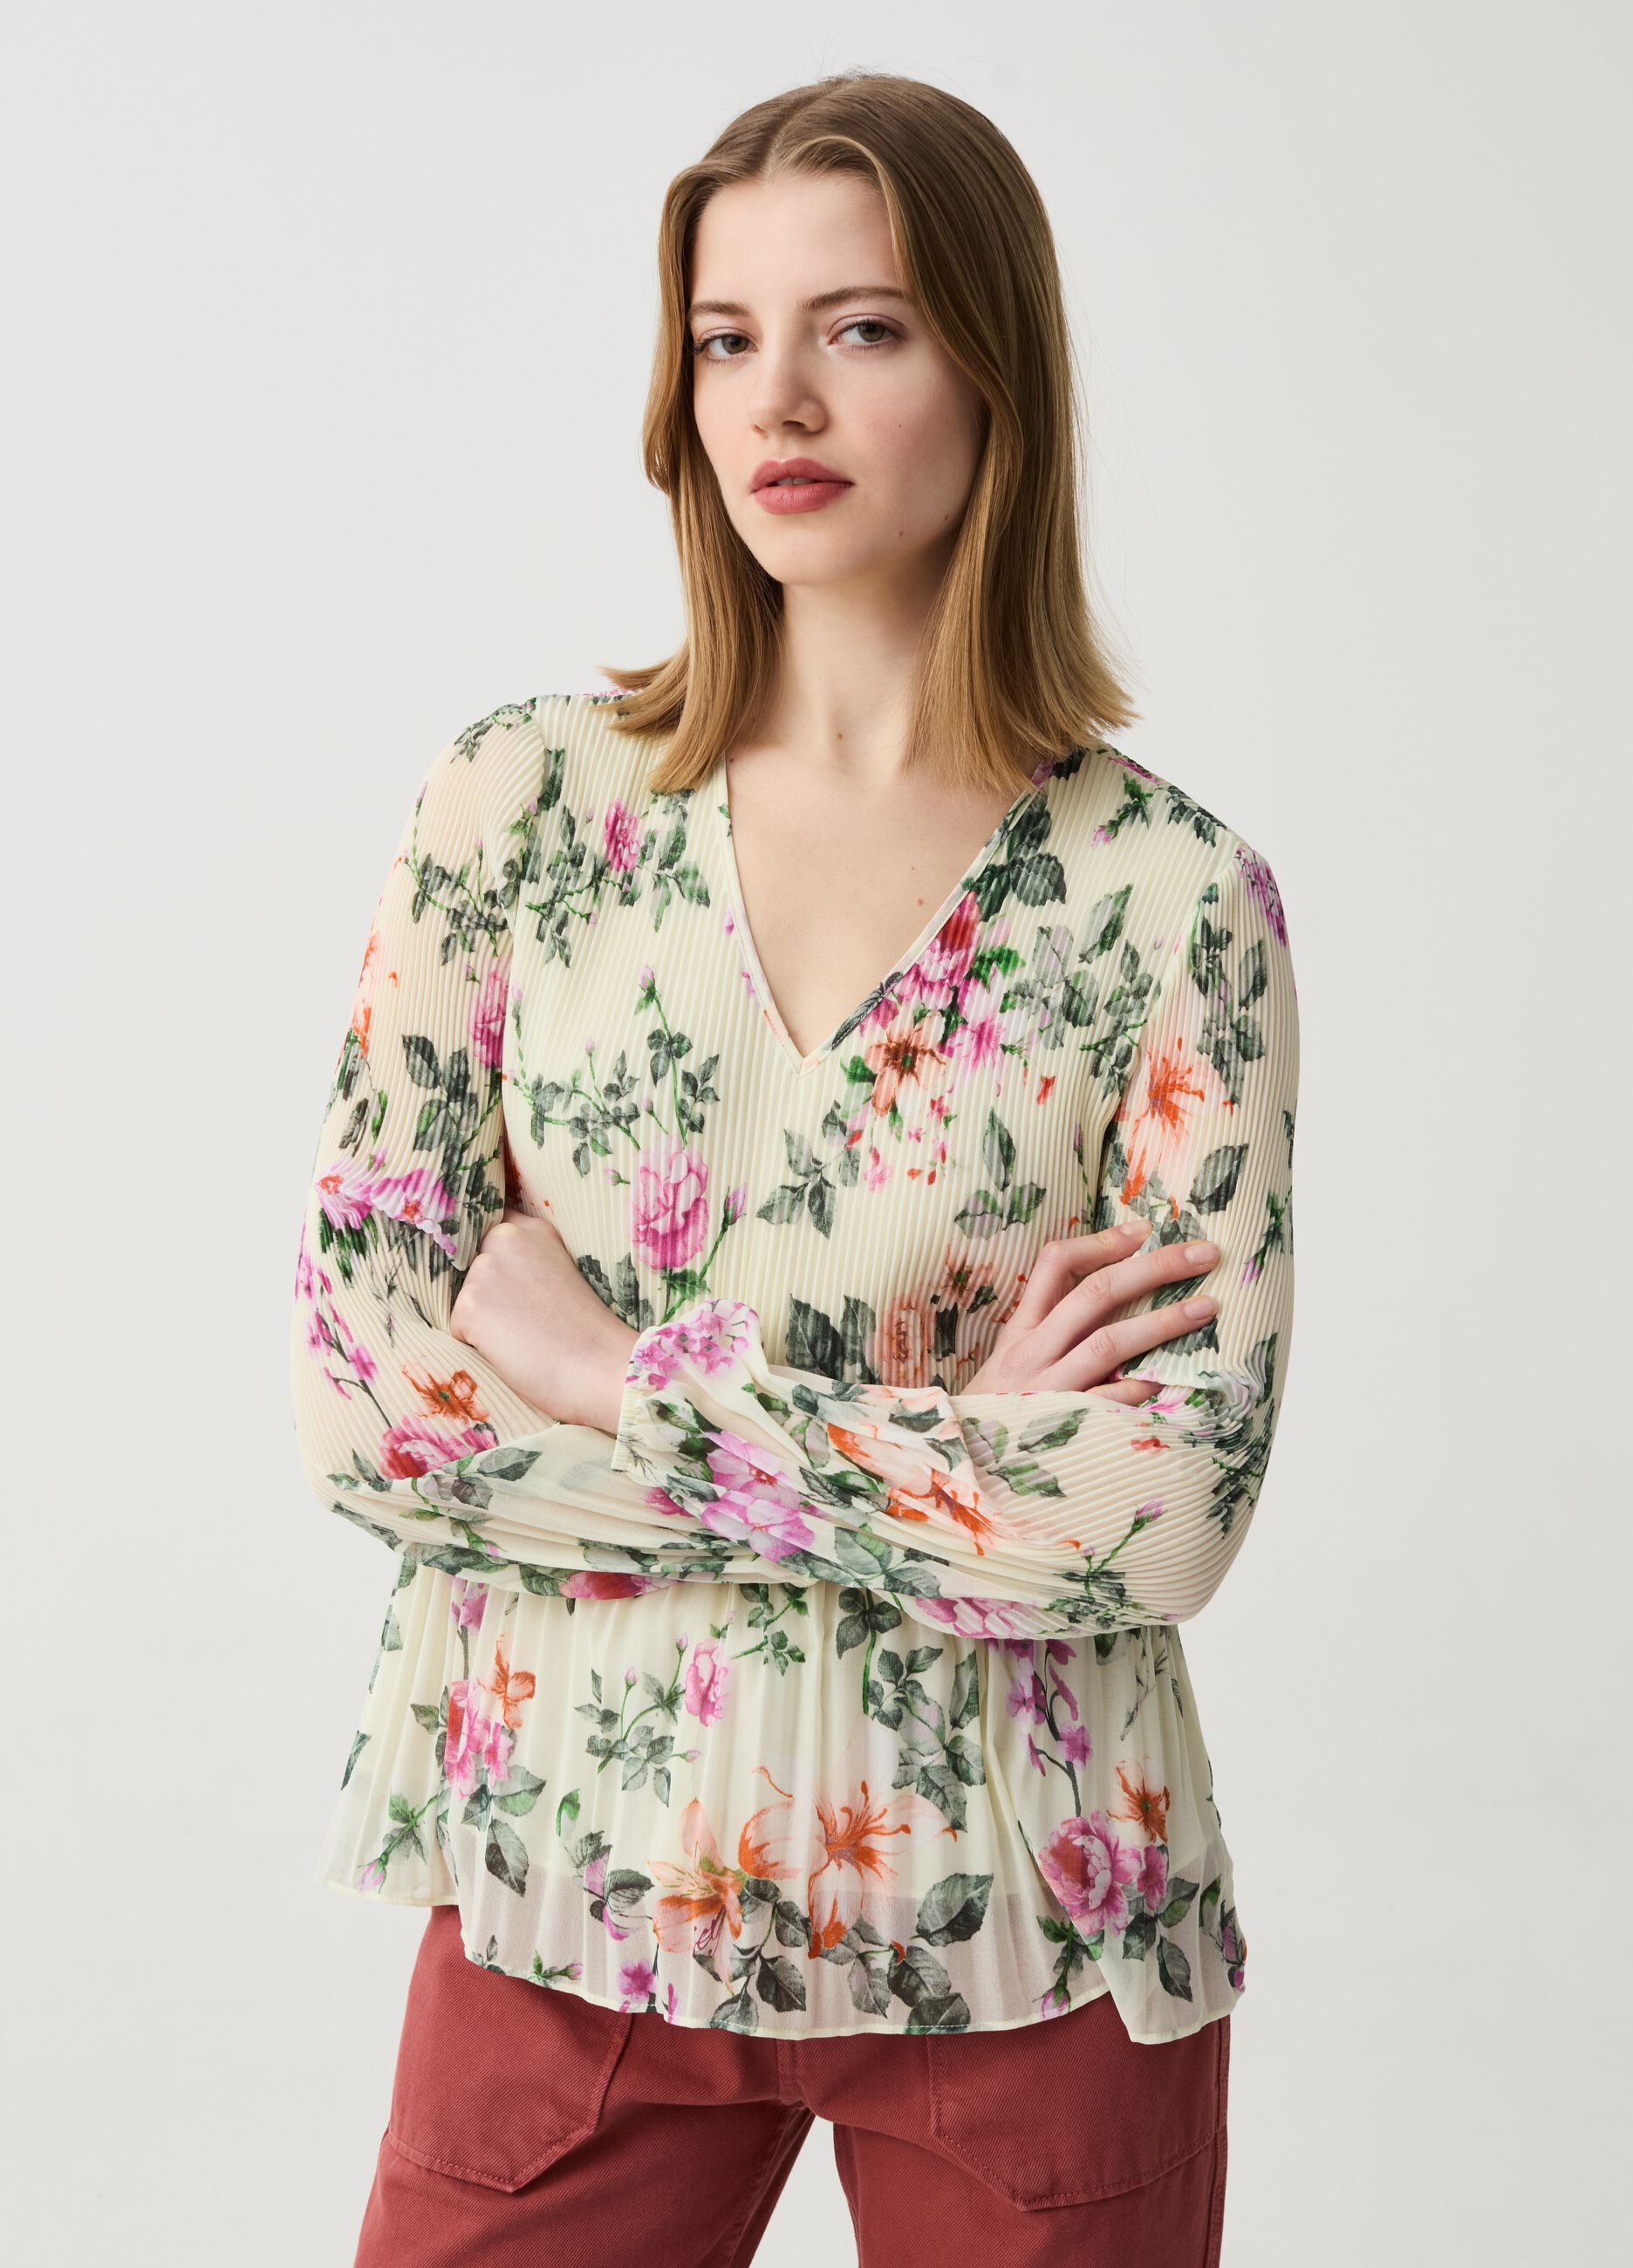 Pleated blouse with floral print